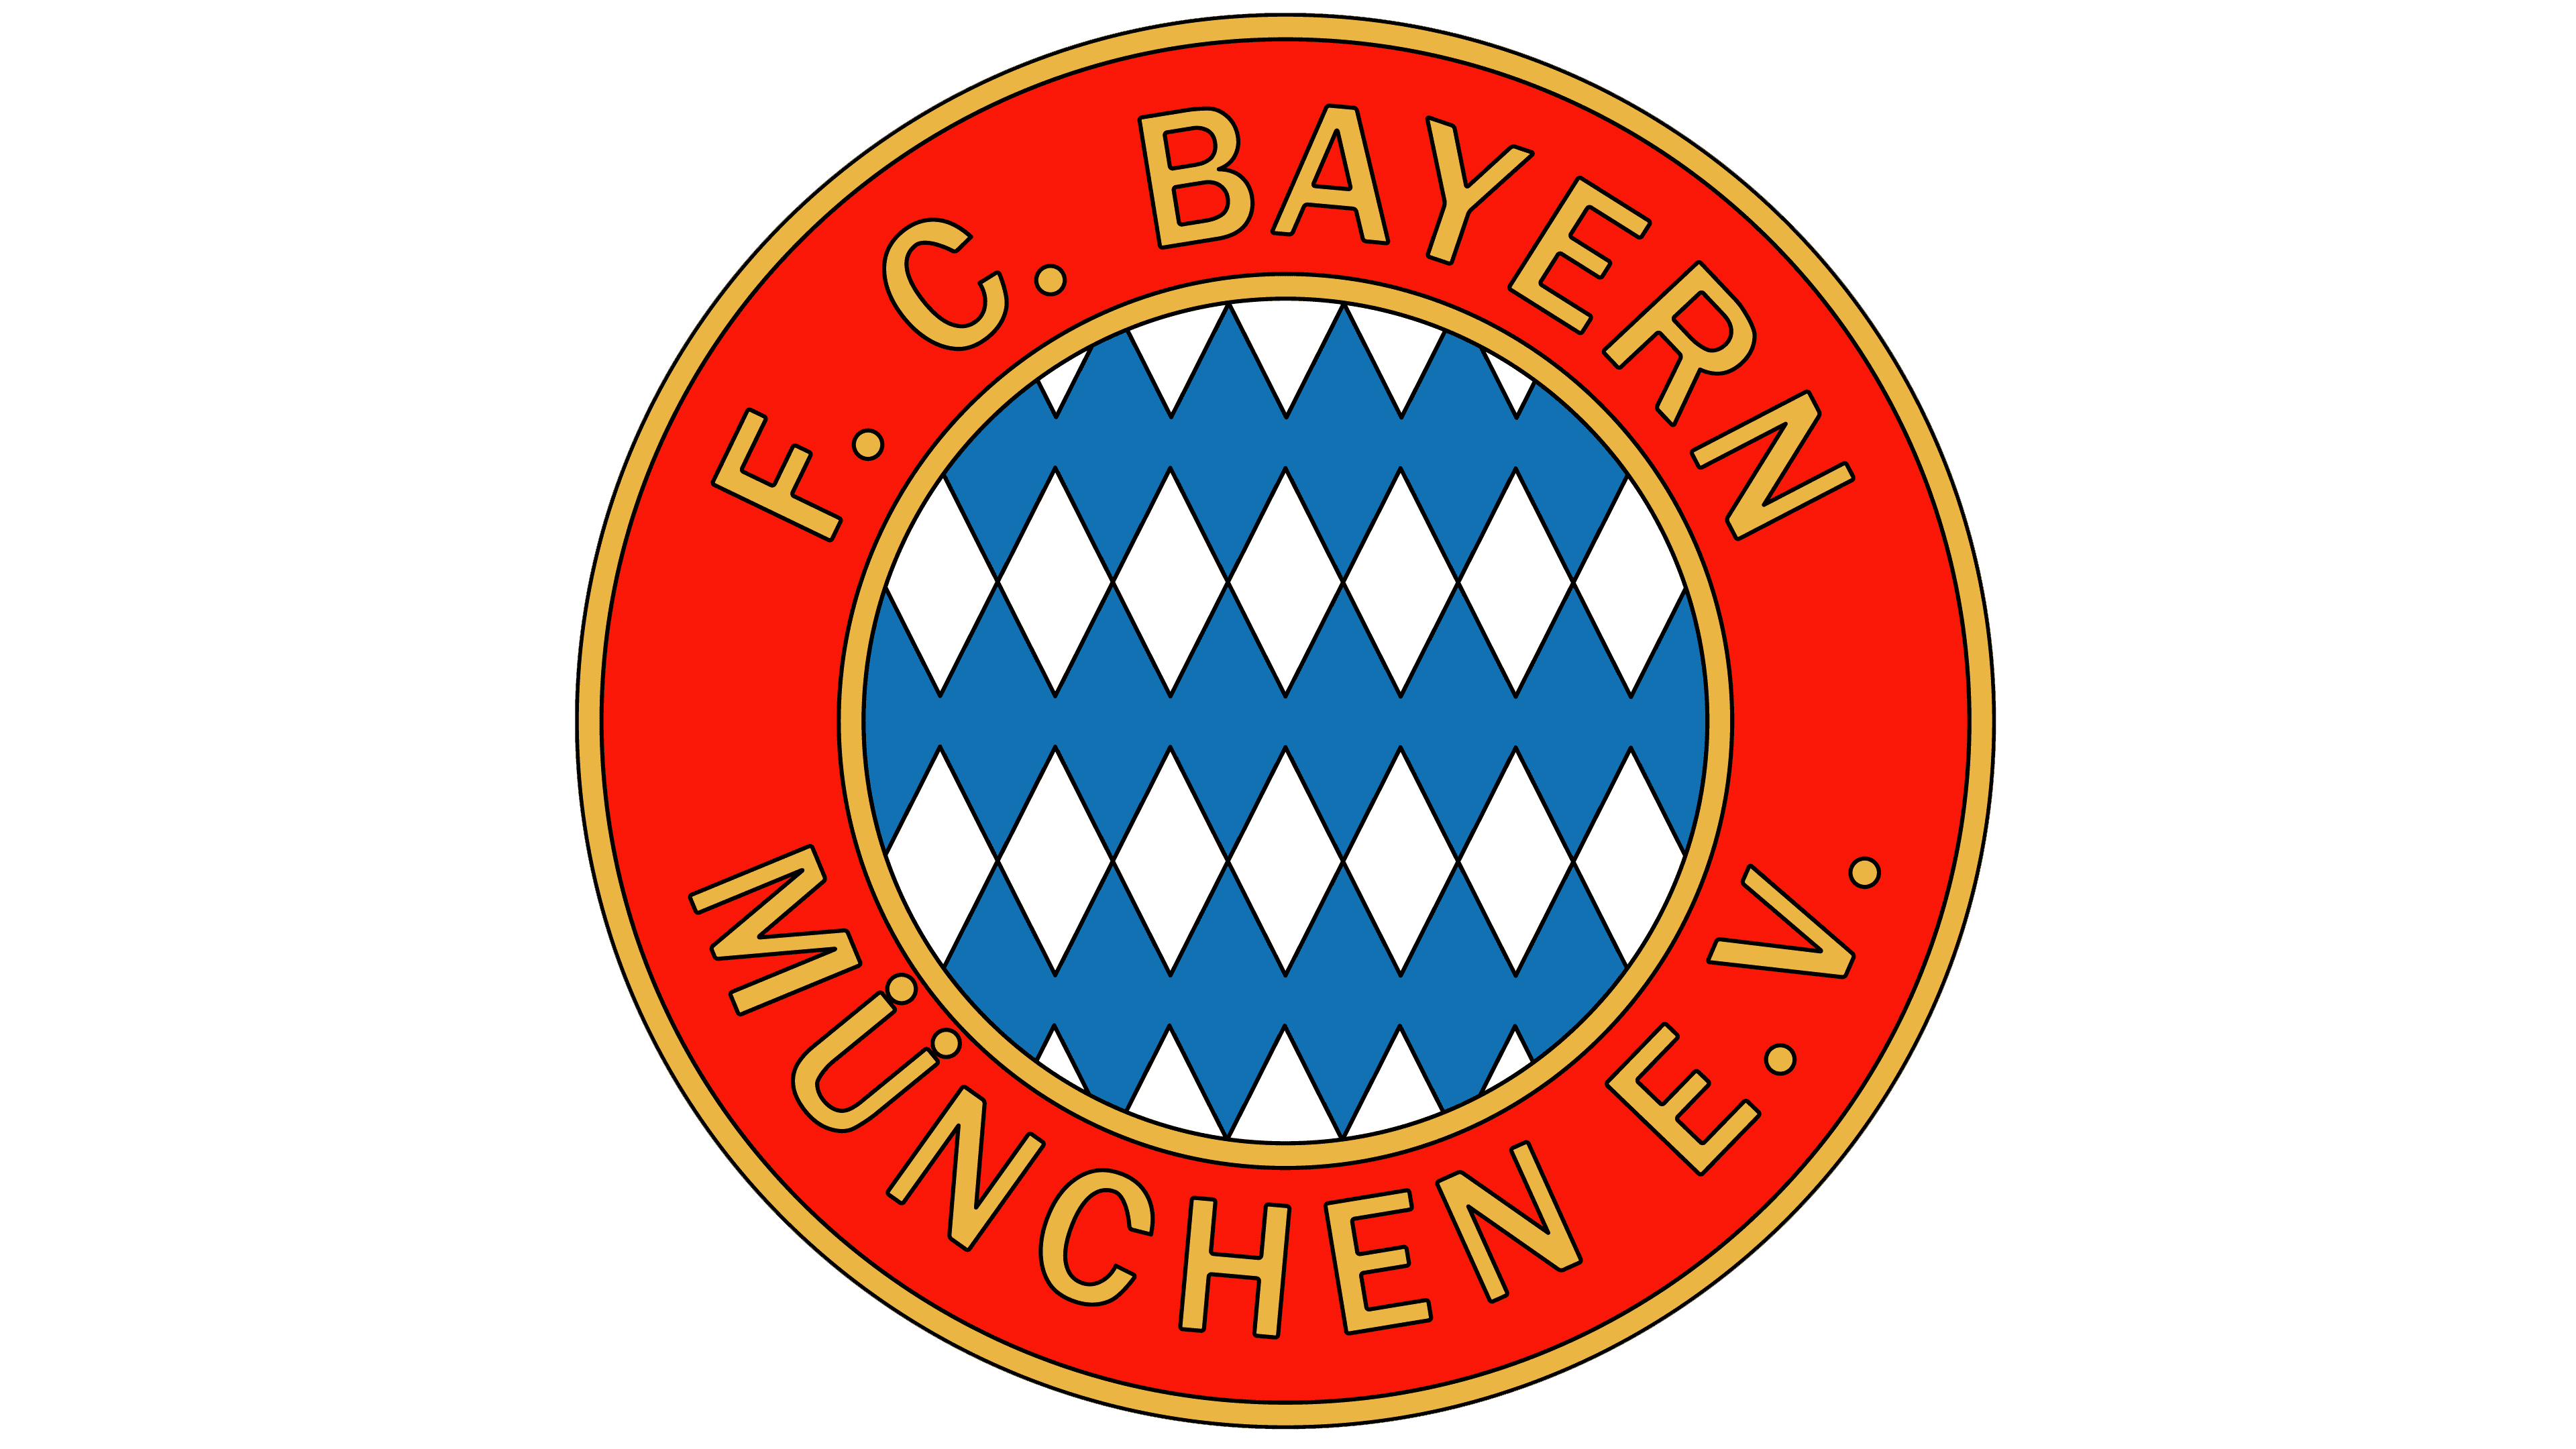 Fc Bayern Munchen Logo The Most Famous Brands And Company Logos In The World